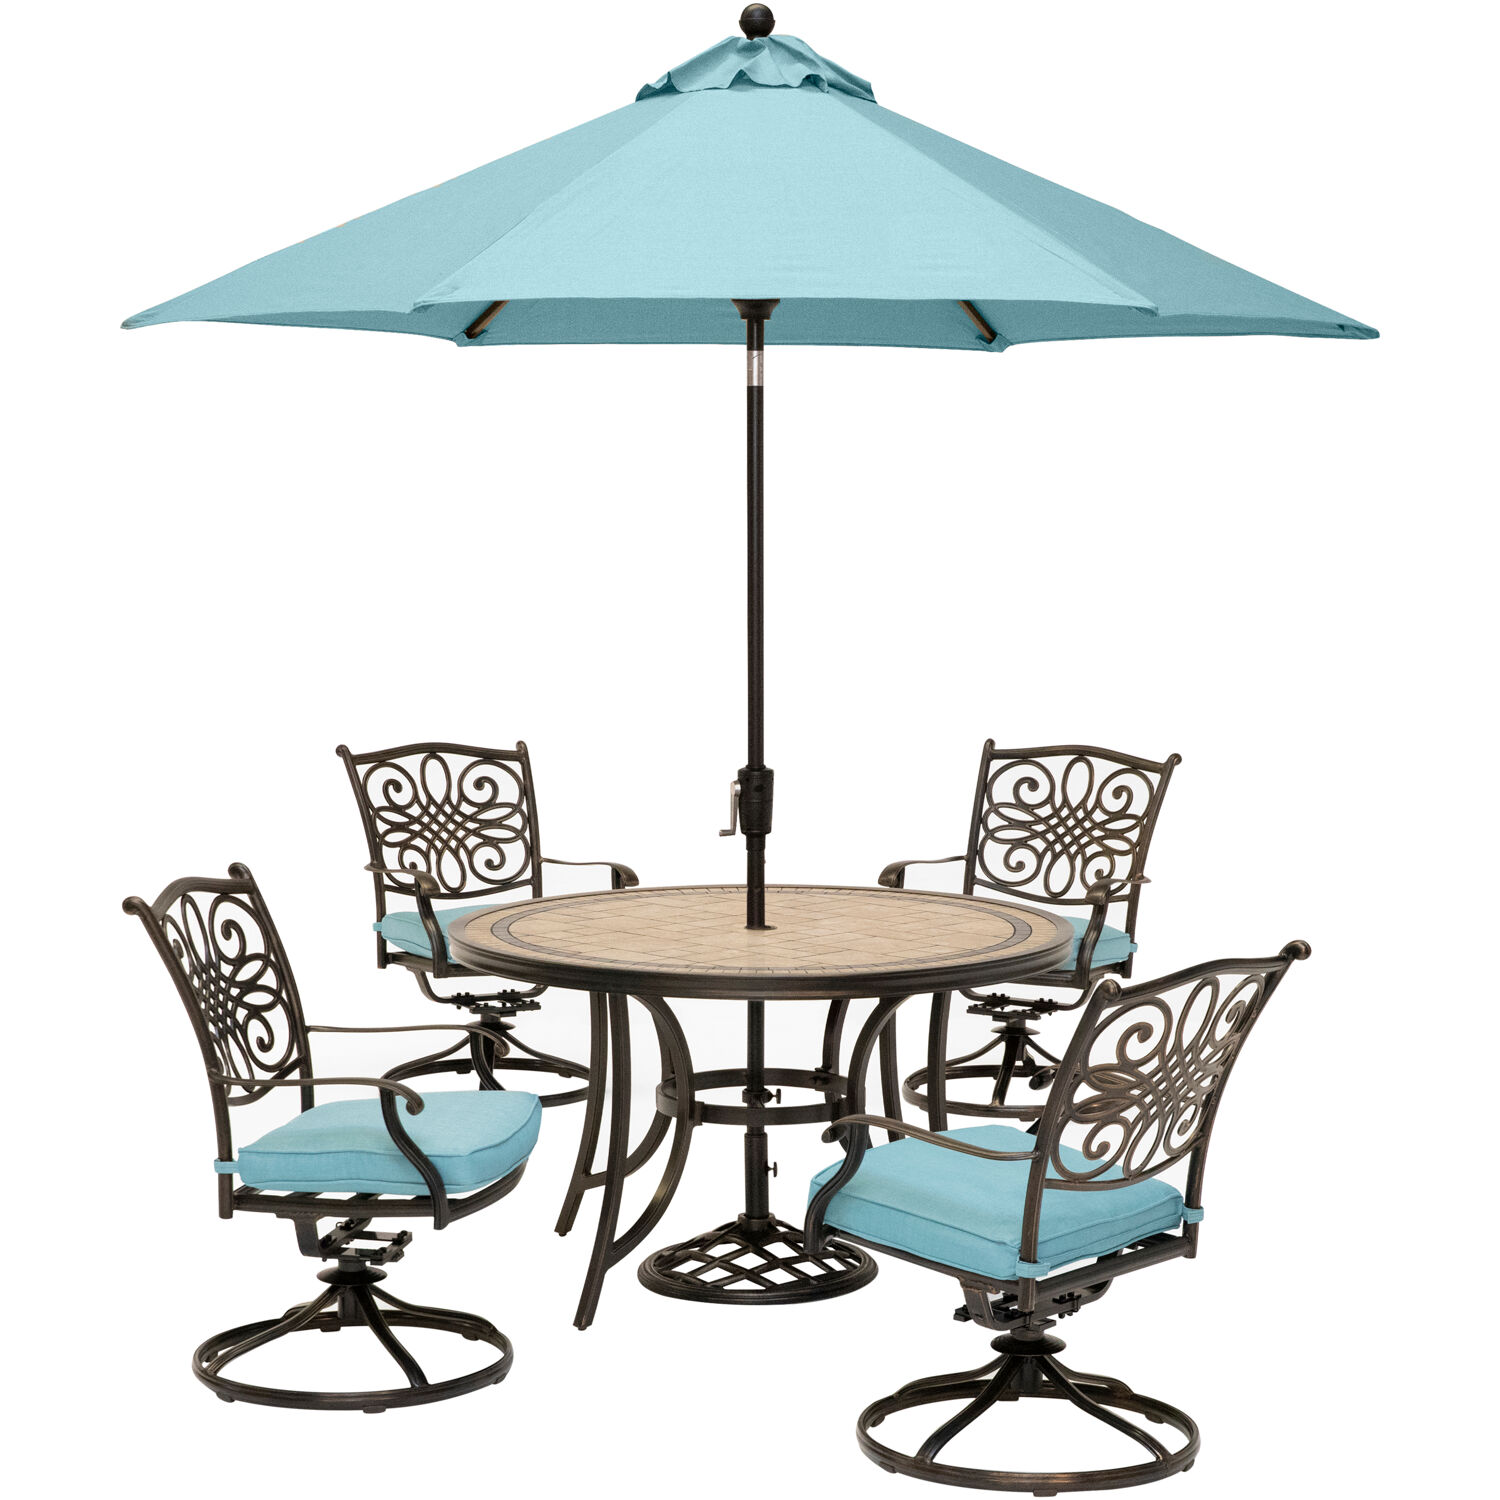 Hanover Monaco 5-Piece Outdoor Furniture Patio Dining Set, 4 Cushioned Swivel Rocker Chairs, 51" Round Tile-Top Table, Umbrella, and Base Brushed - image 1 of 13